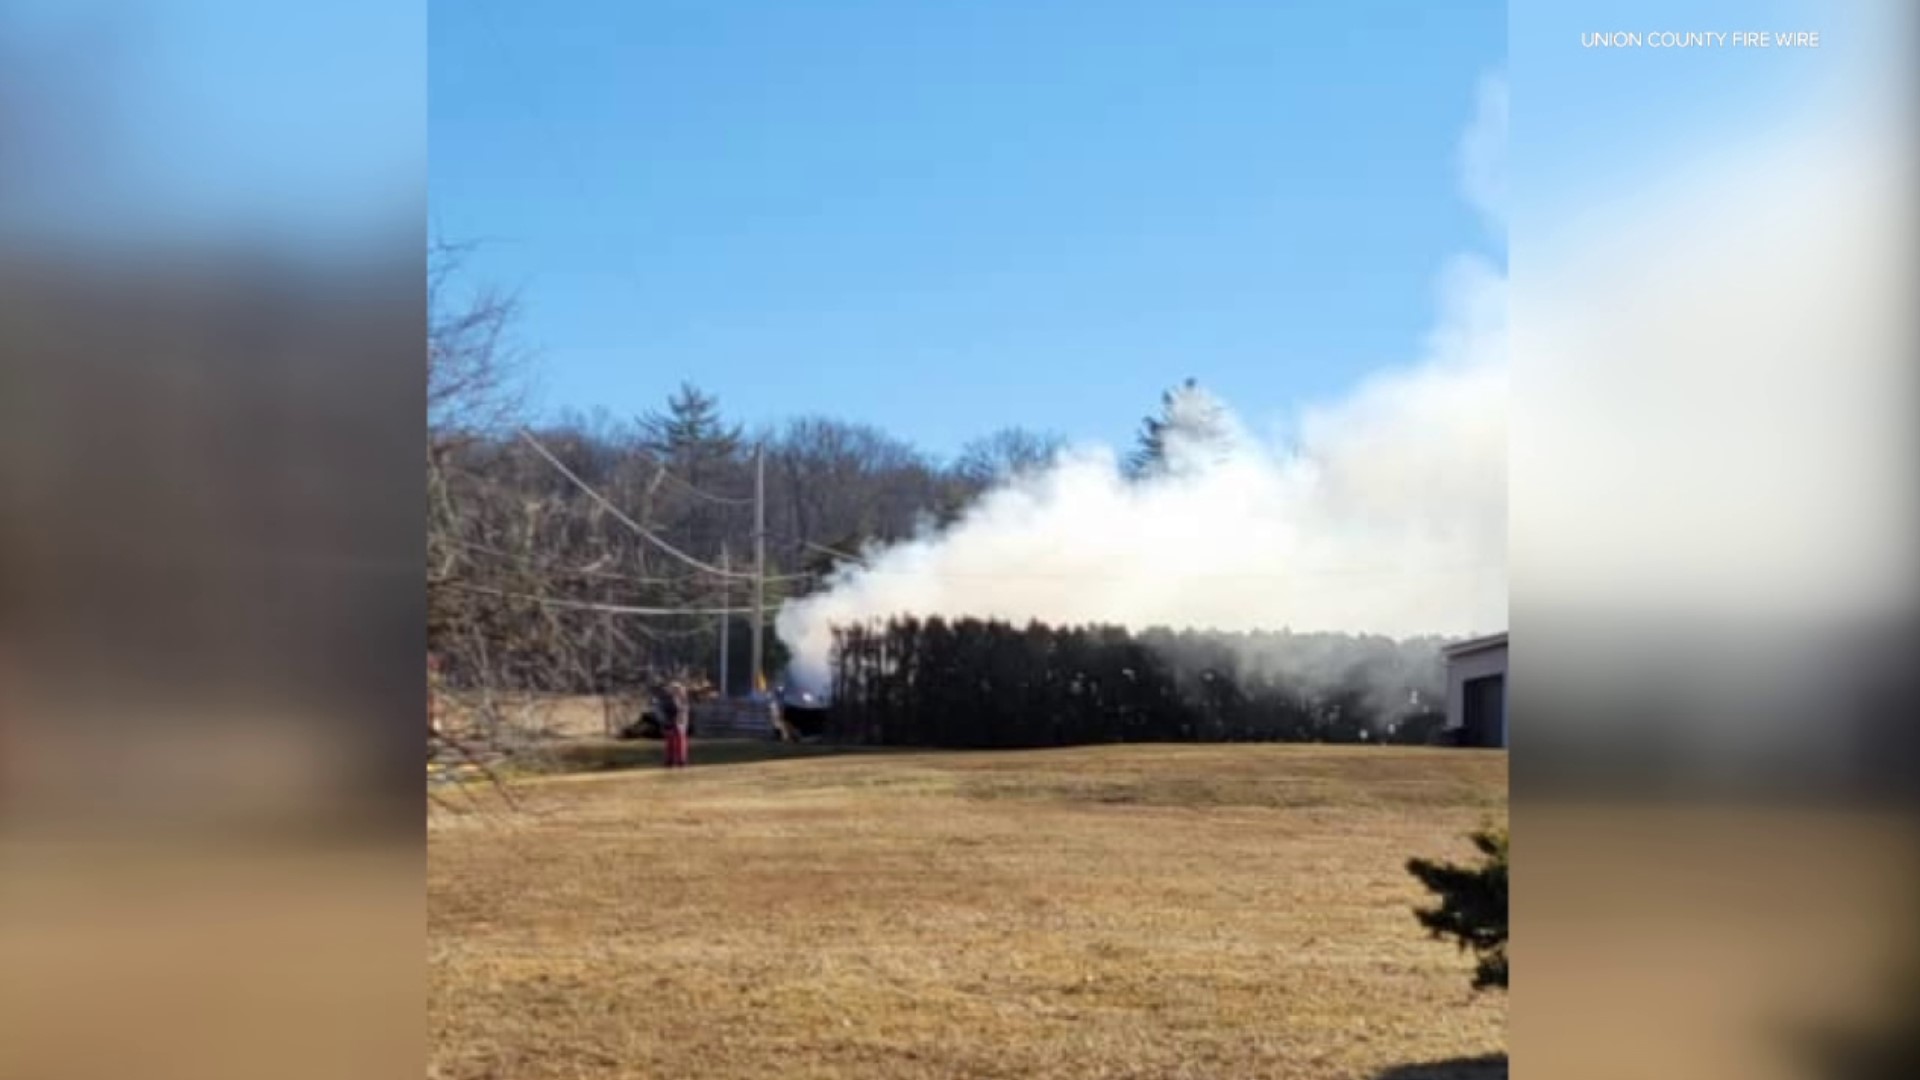 The fire started just before 3 p.m. Monday at a garage in East Buffalo Township near Lewisburg.